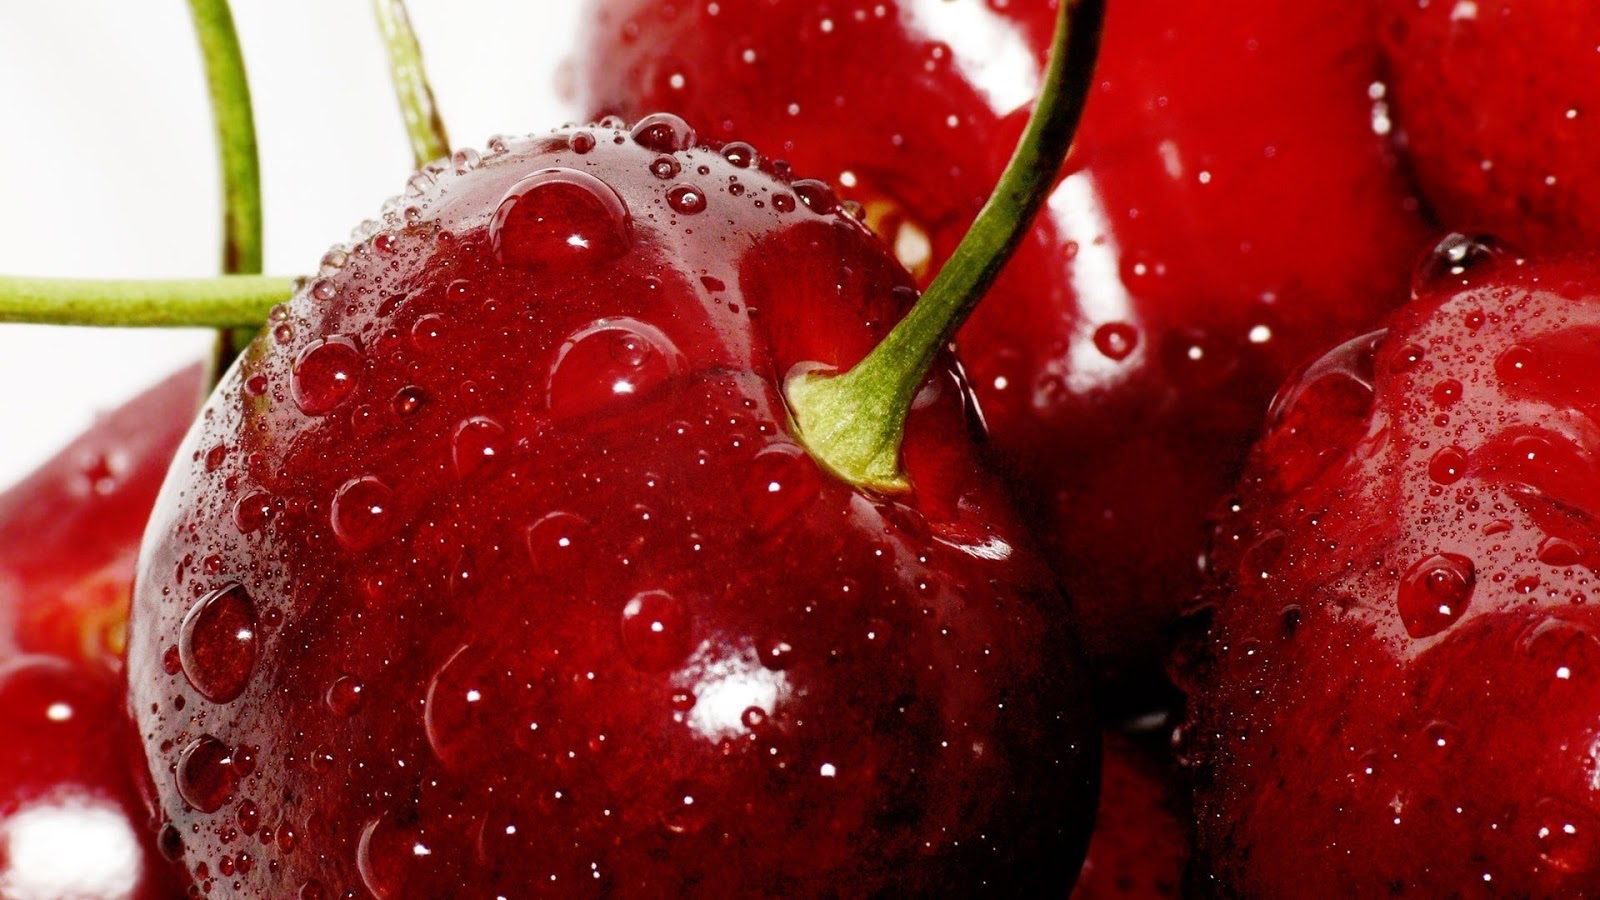 fruits pictures wallpapers,natural foods,cherry,fruit,food,red